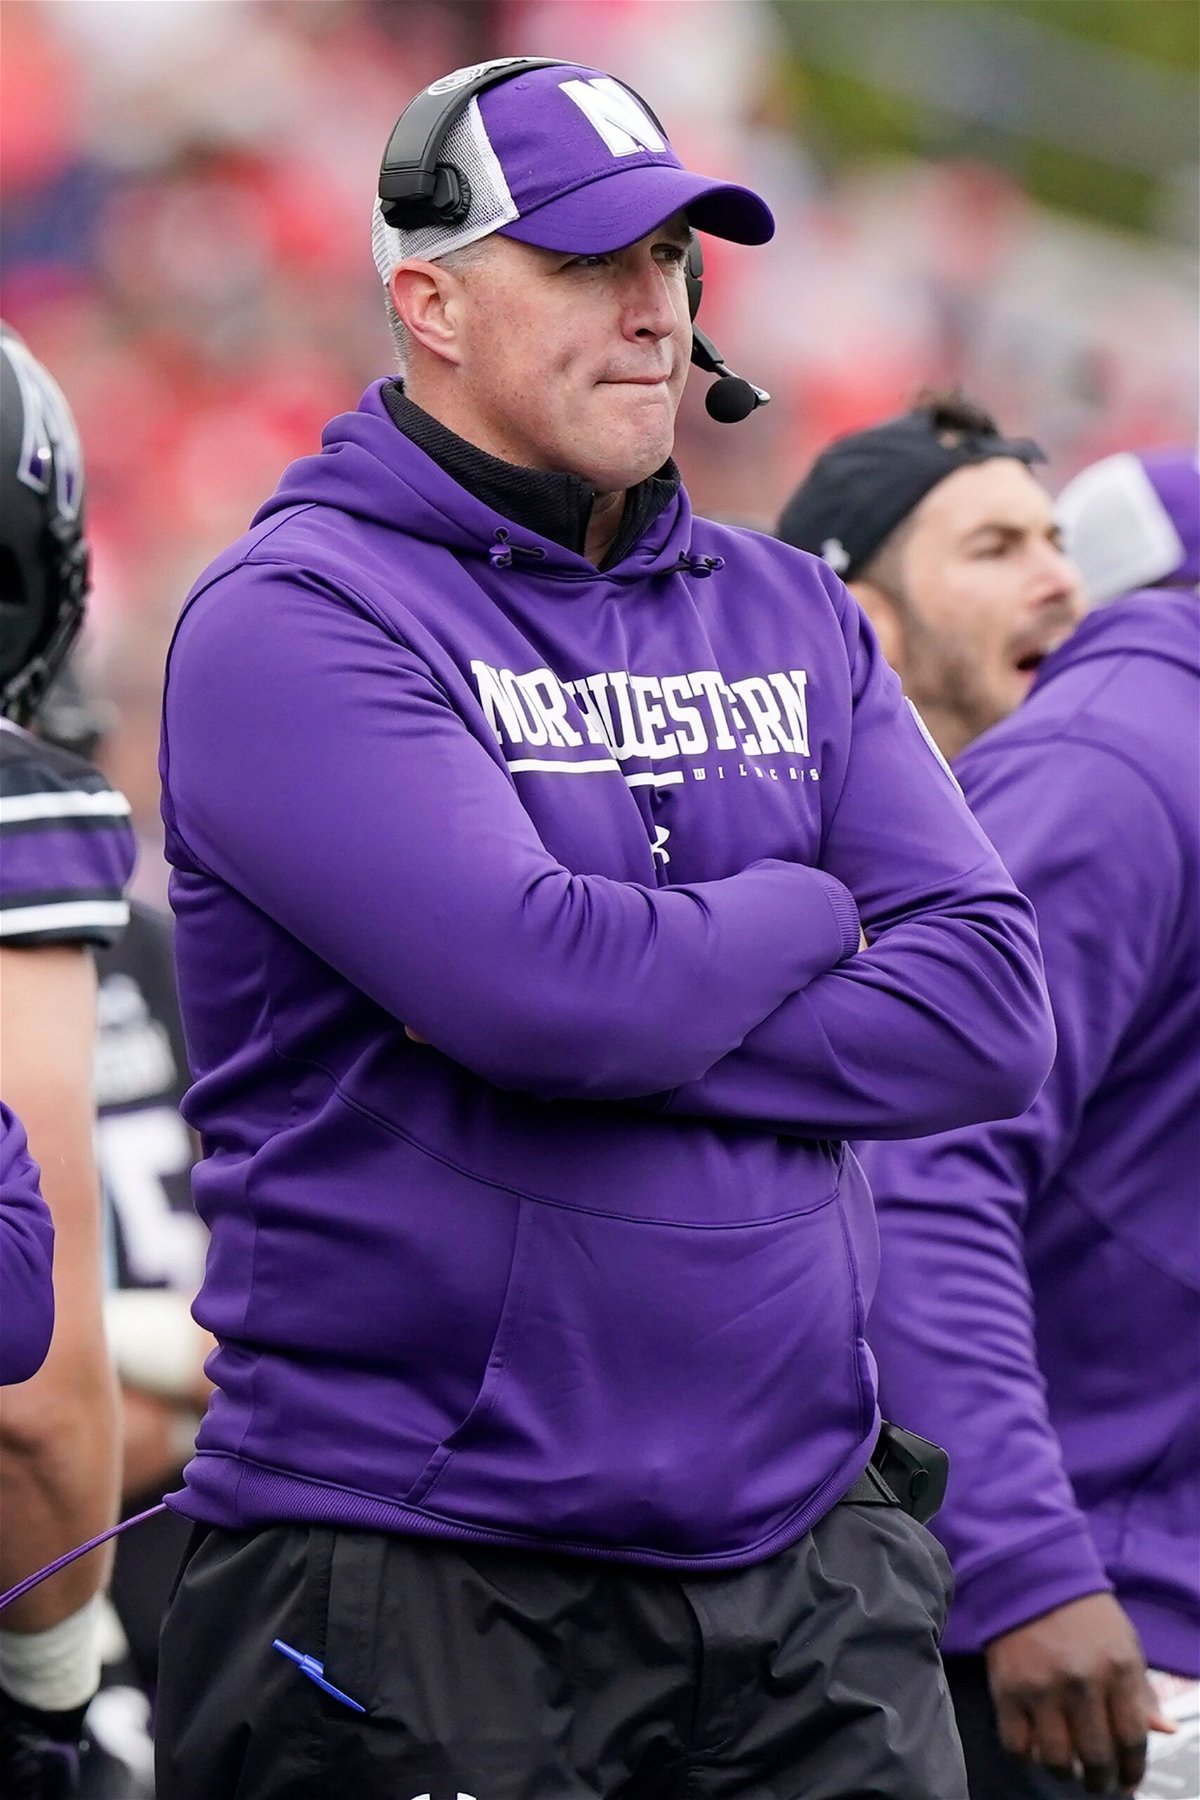 Former Northwestern University athletes allege toxic culture of hazing and sexual assault in the athletic department, attorneys